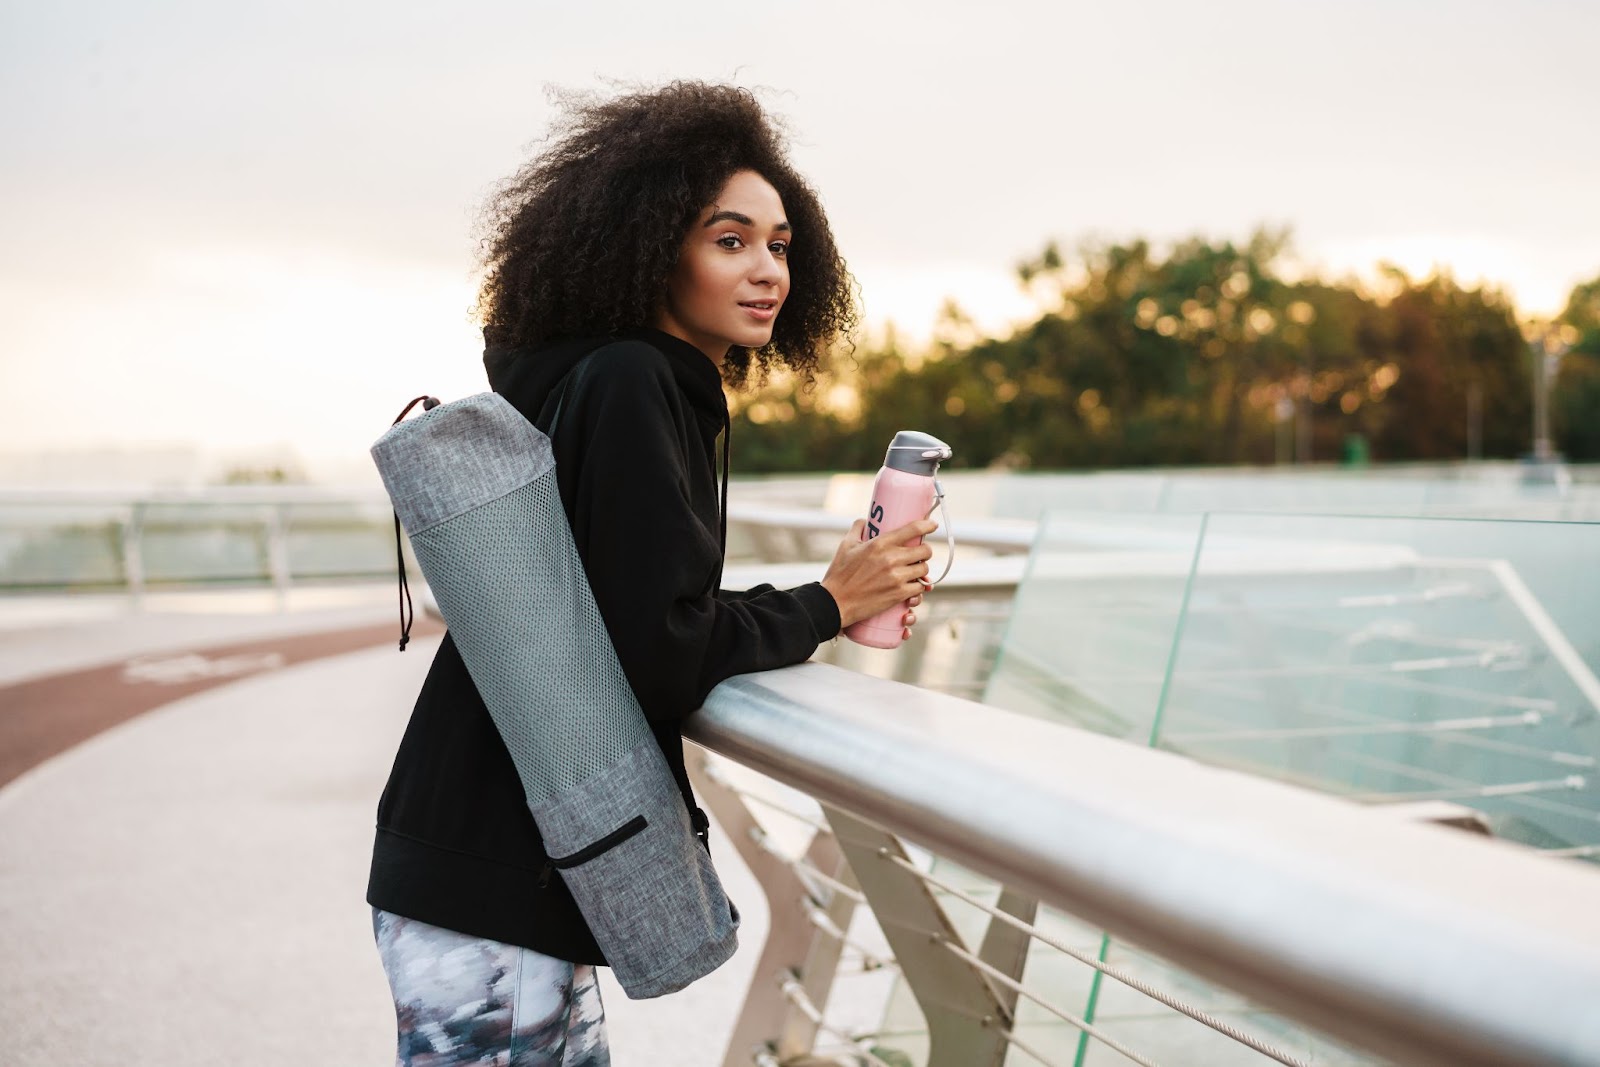 Attractive woman carrying a portable bottle of water in her hand